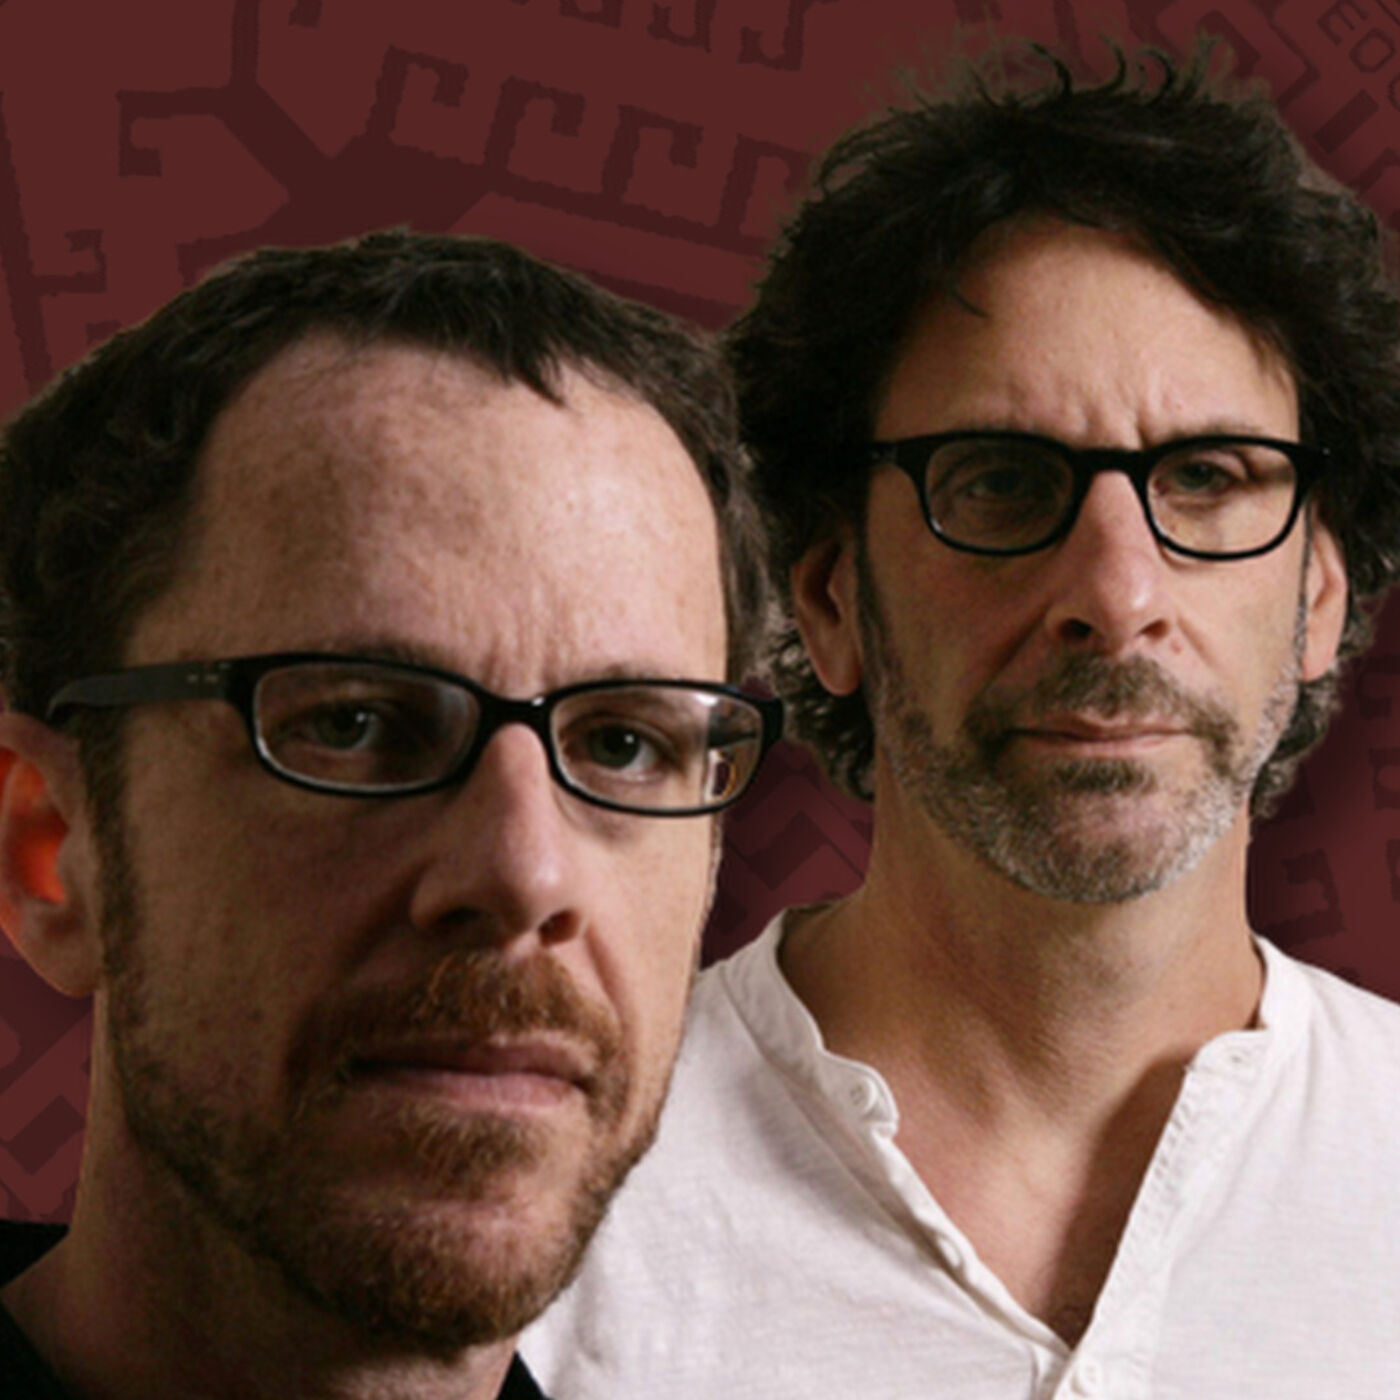 The Coen Brothers' Comedy | The Directors Project